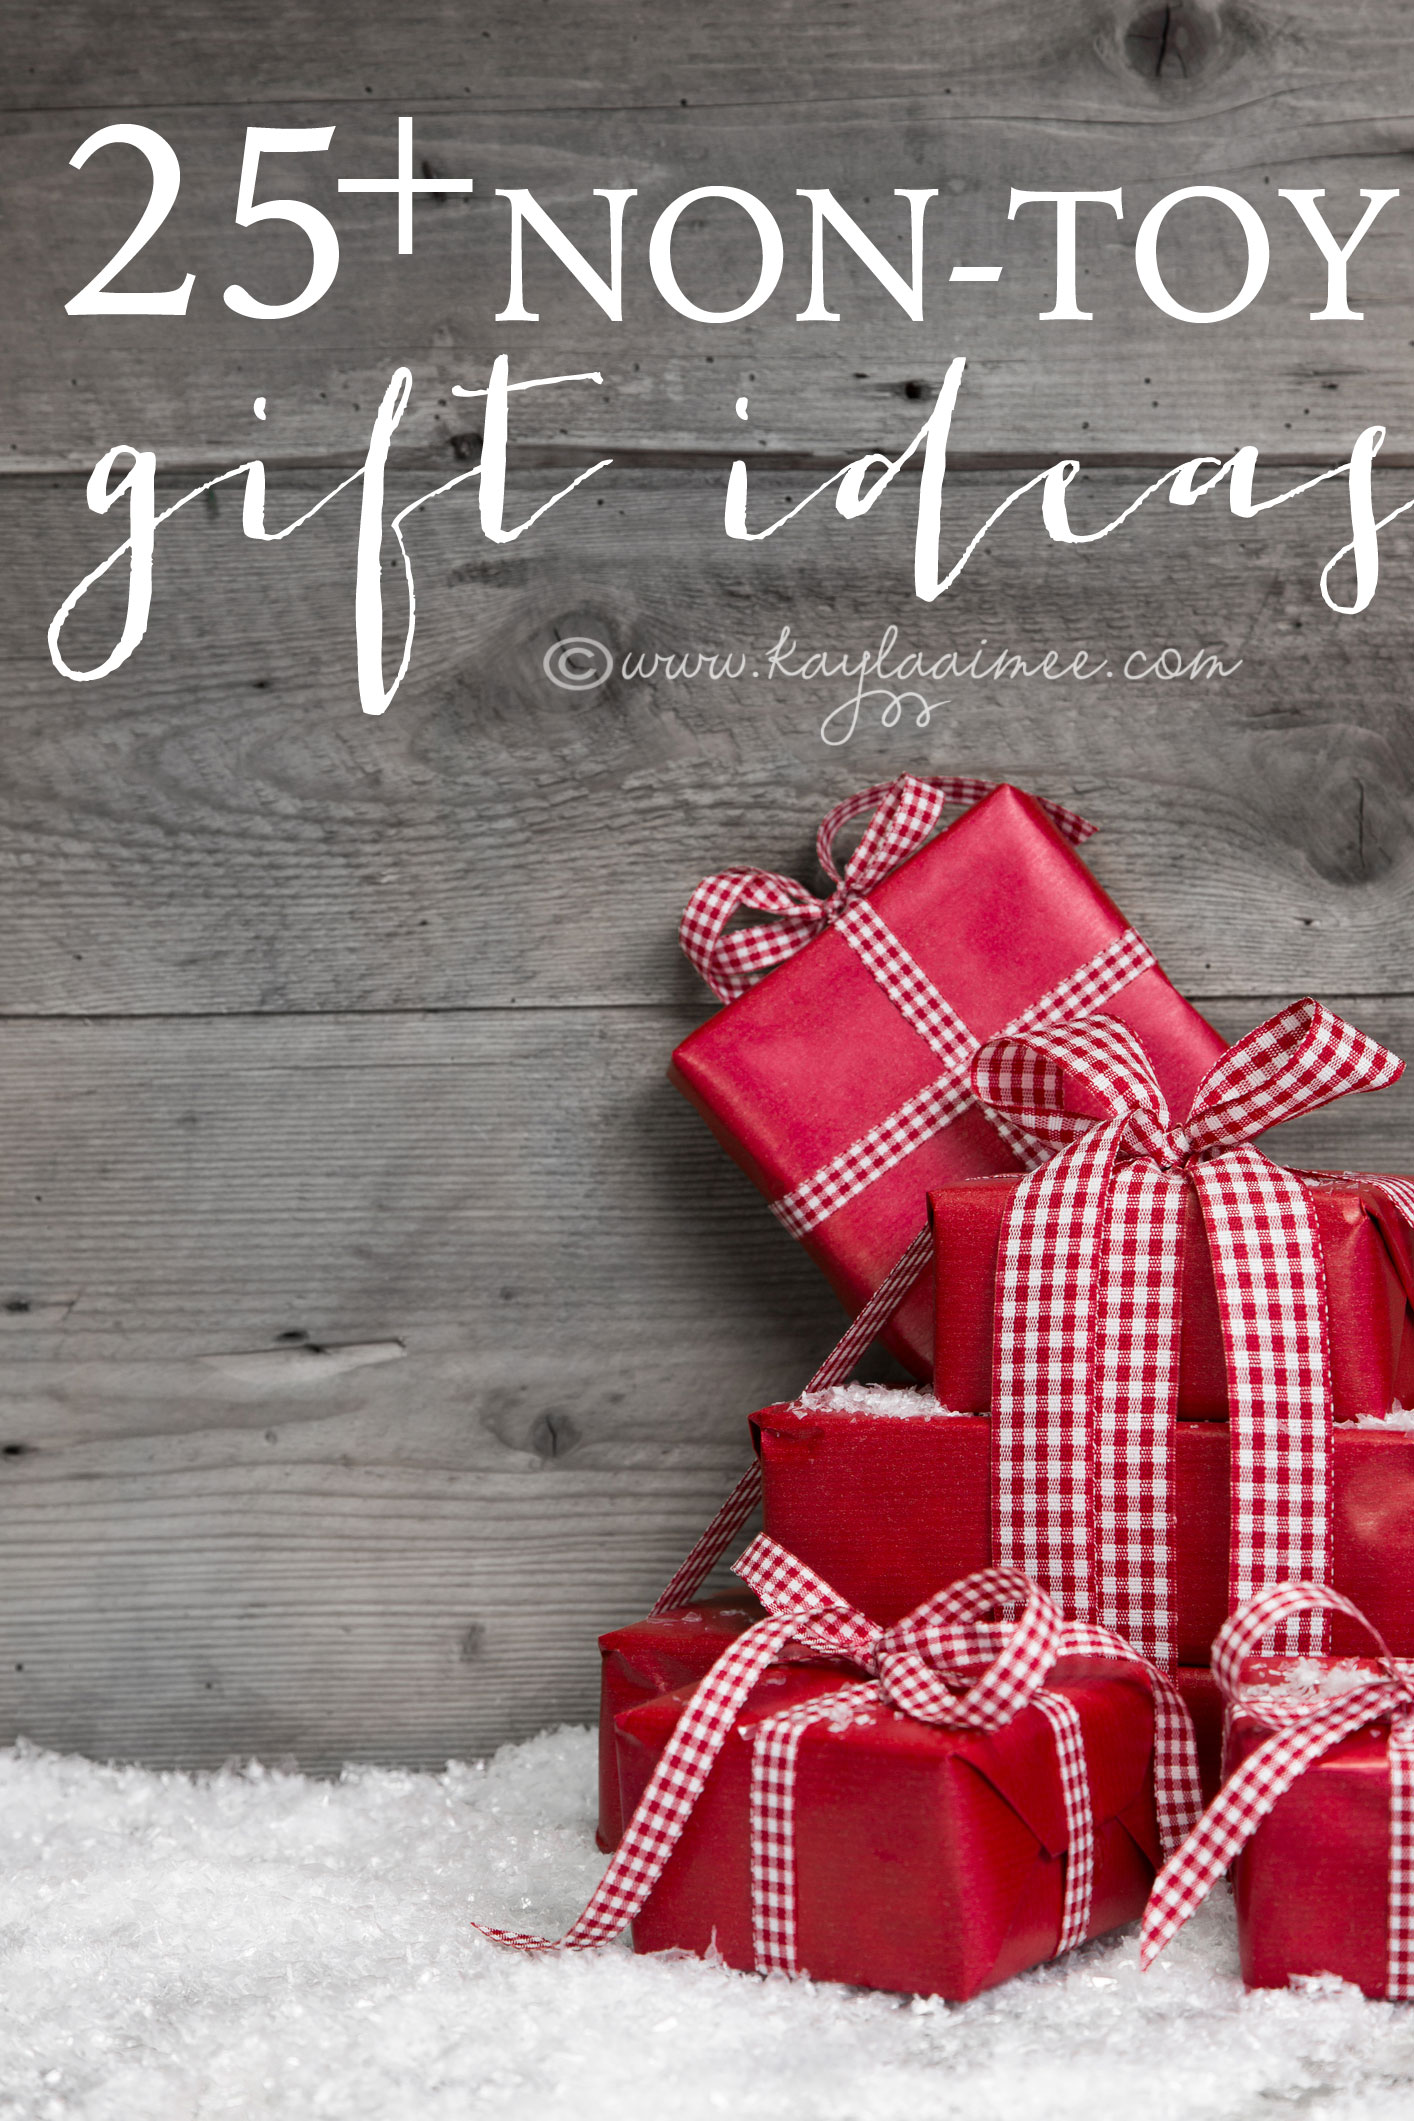 How To Have A No-Toy Christmas, Non-Toy Gift Ideas